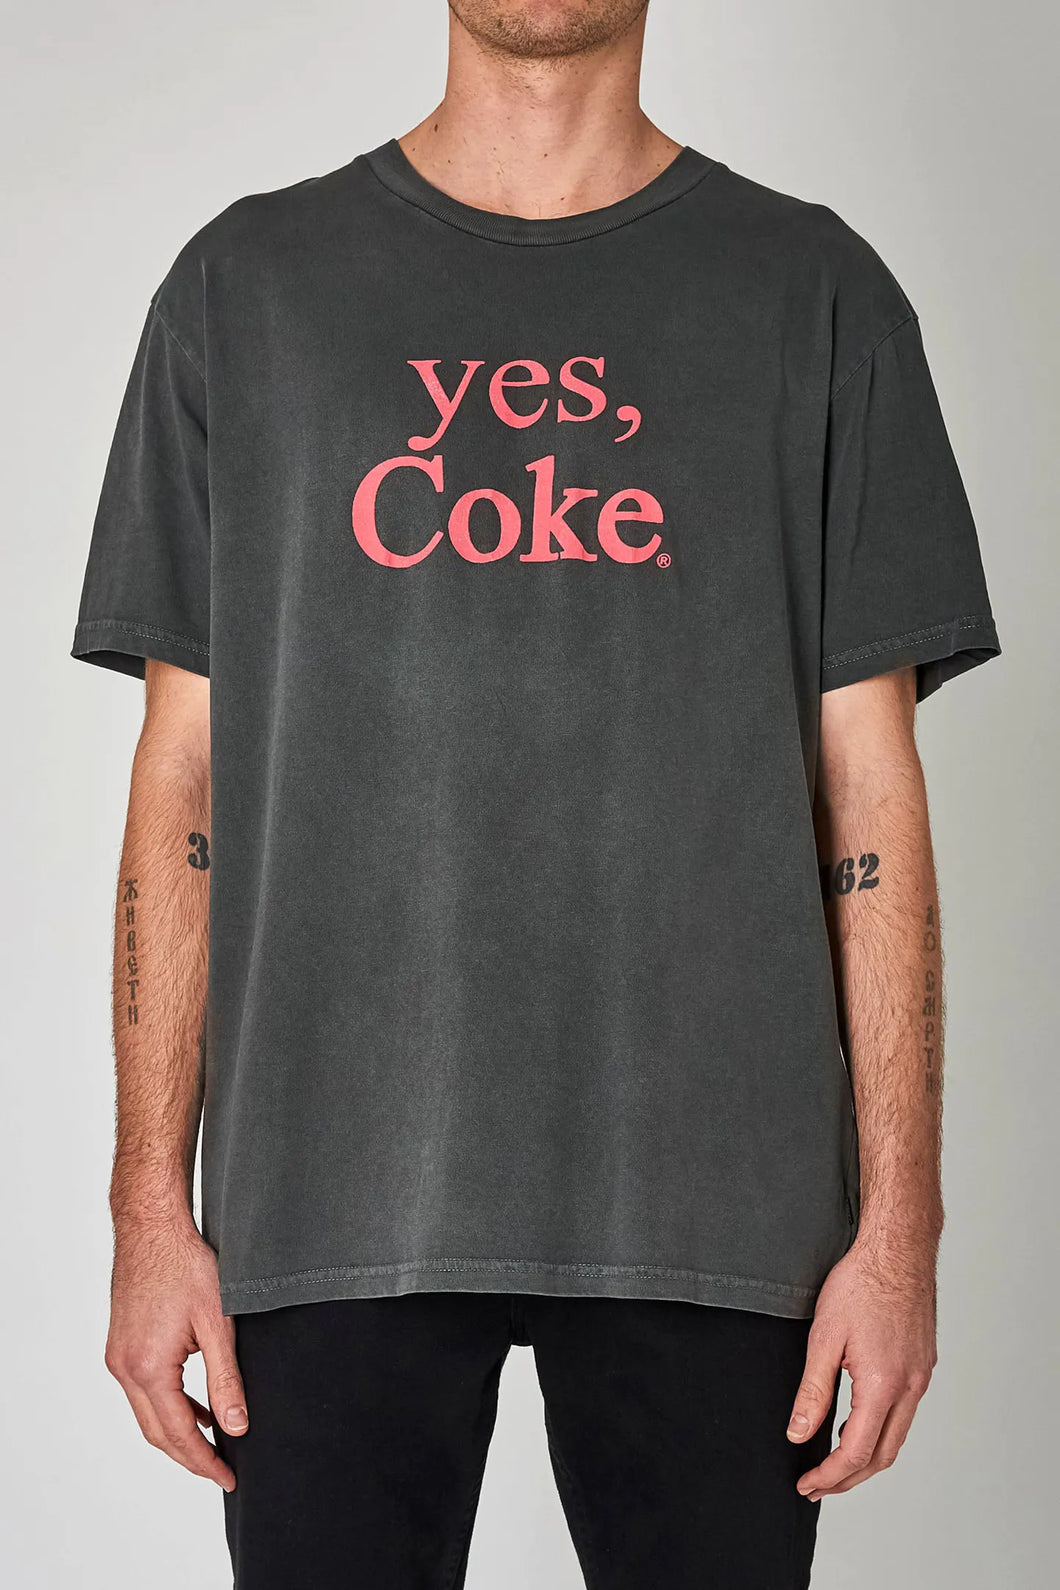 ROLLAS - YES COCA COLA TEE - WASHED BLACK